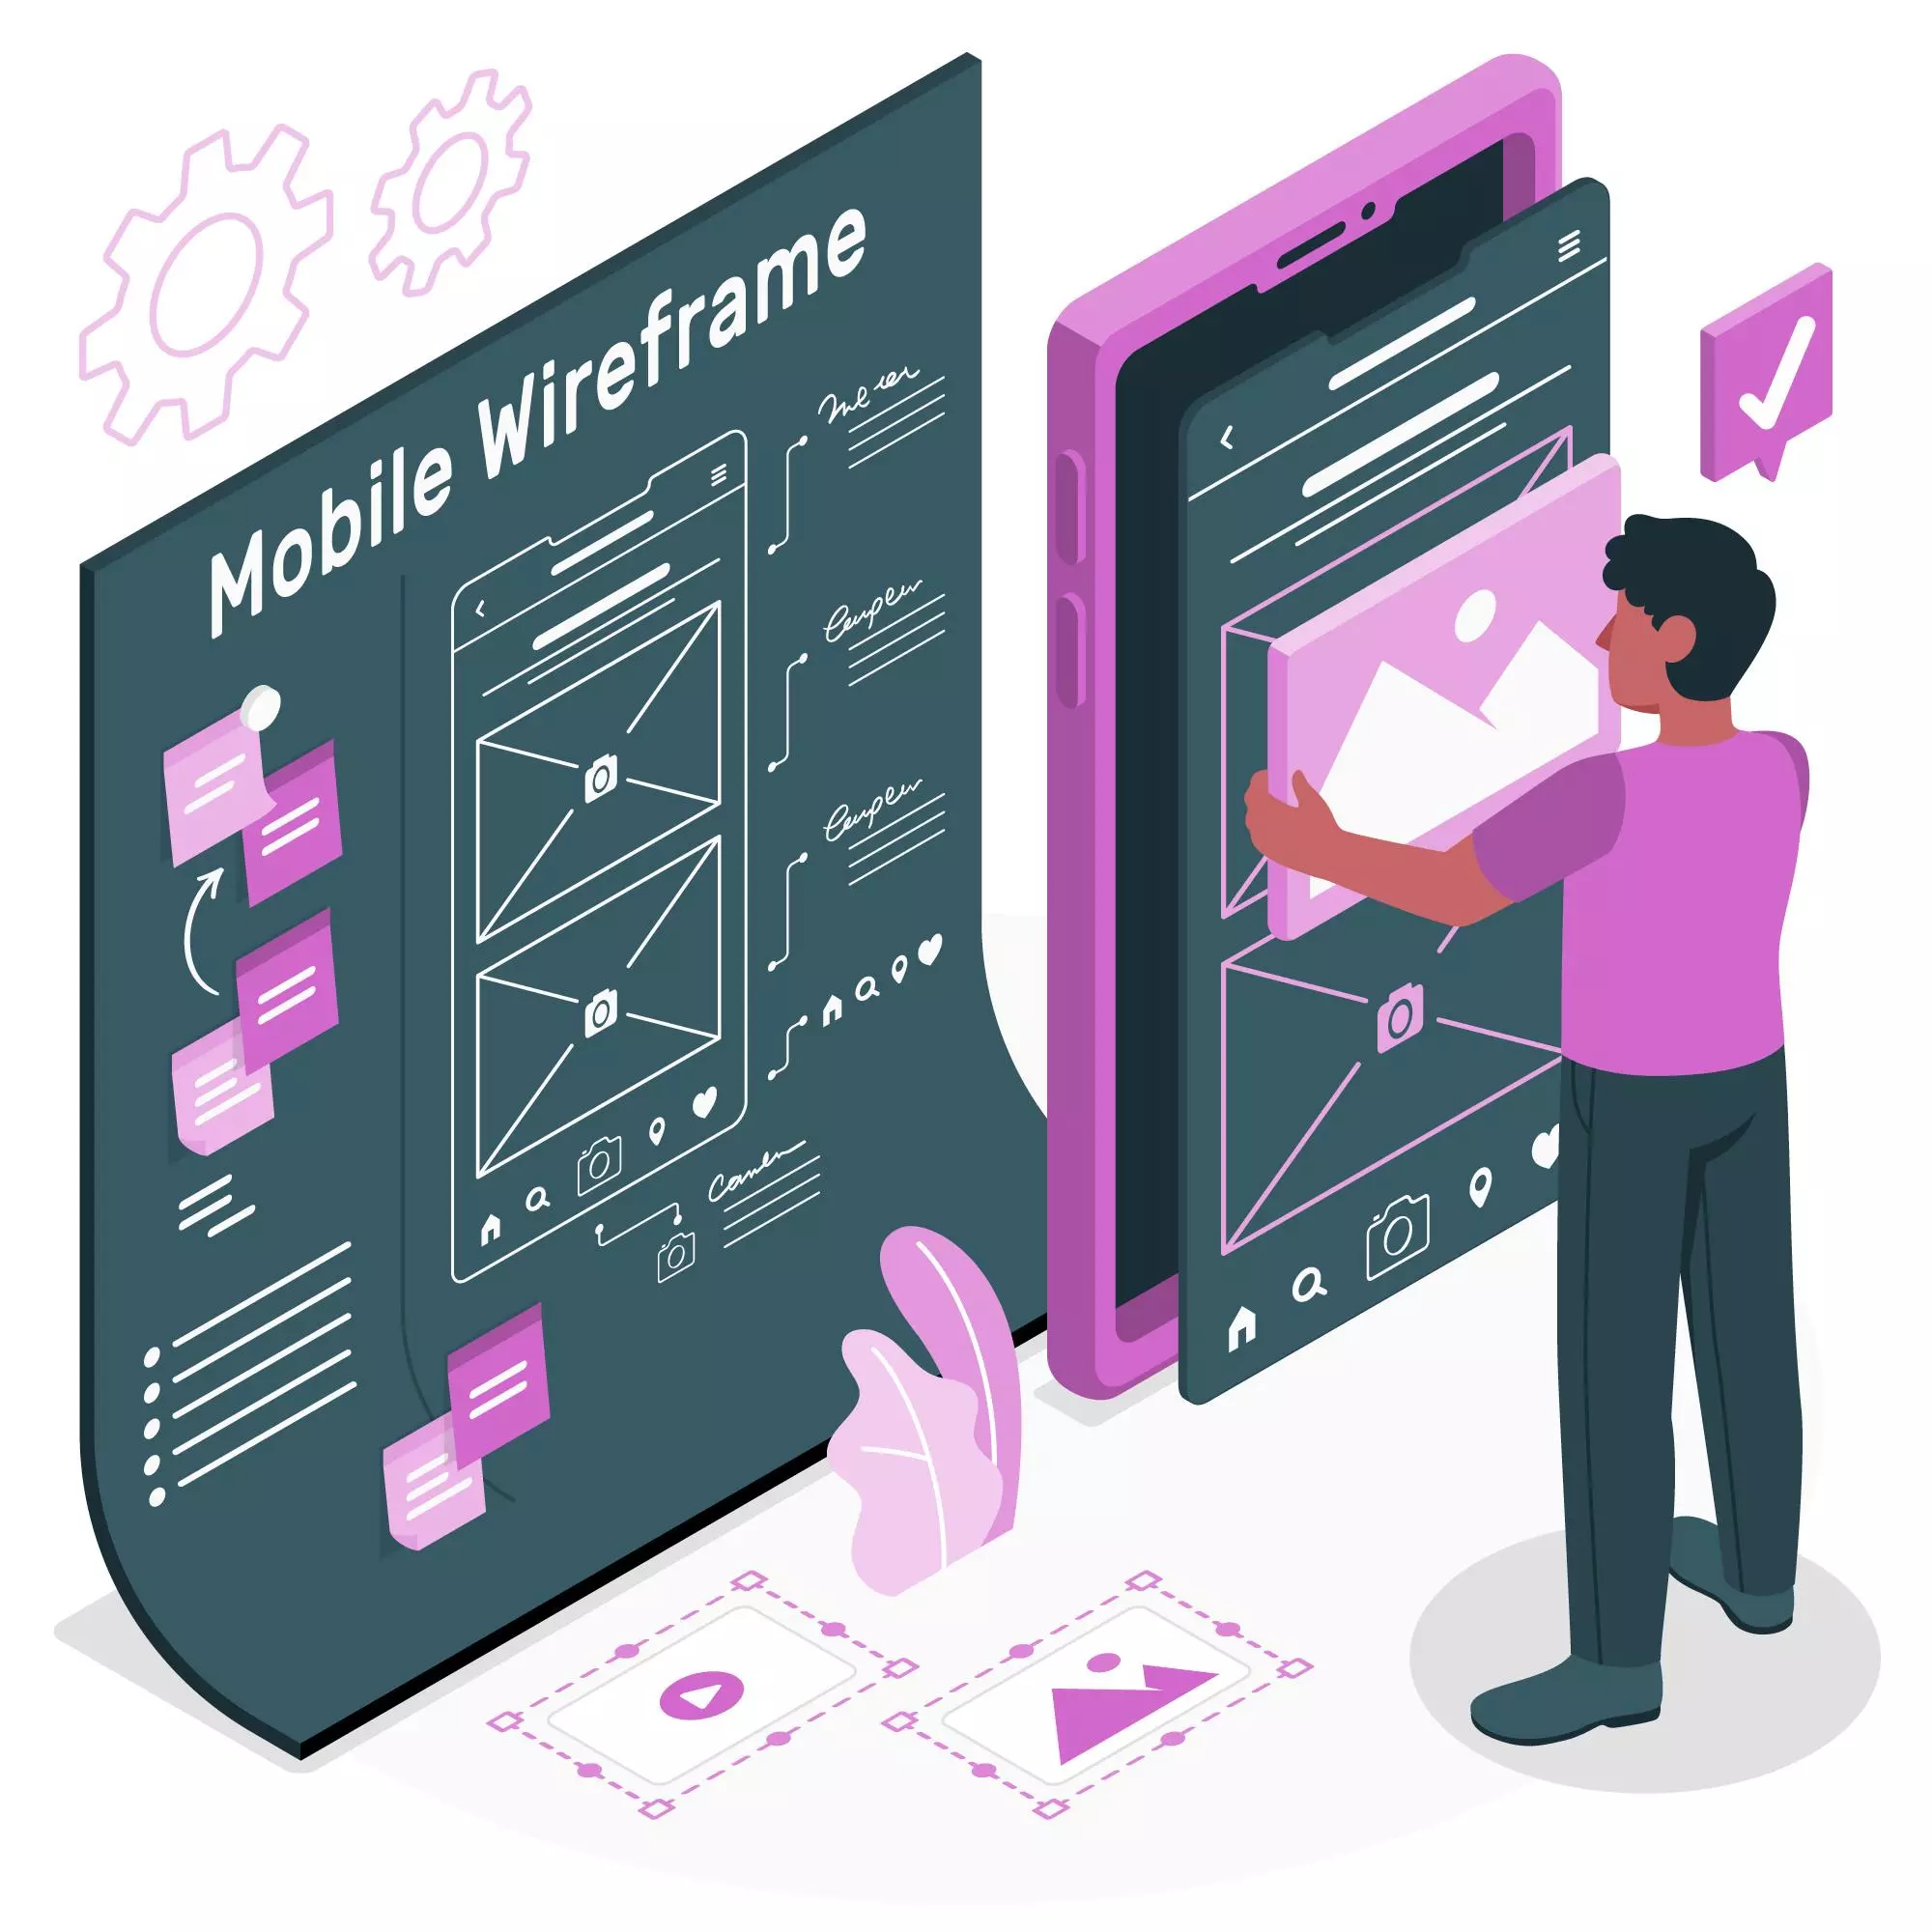 An art illustrating mobile wireframe creation